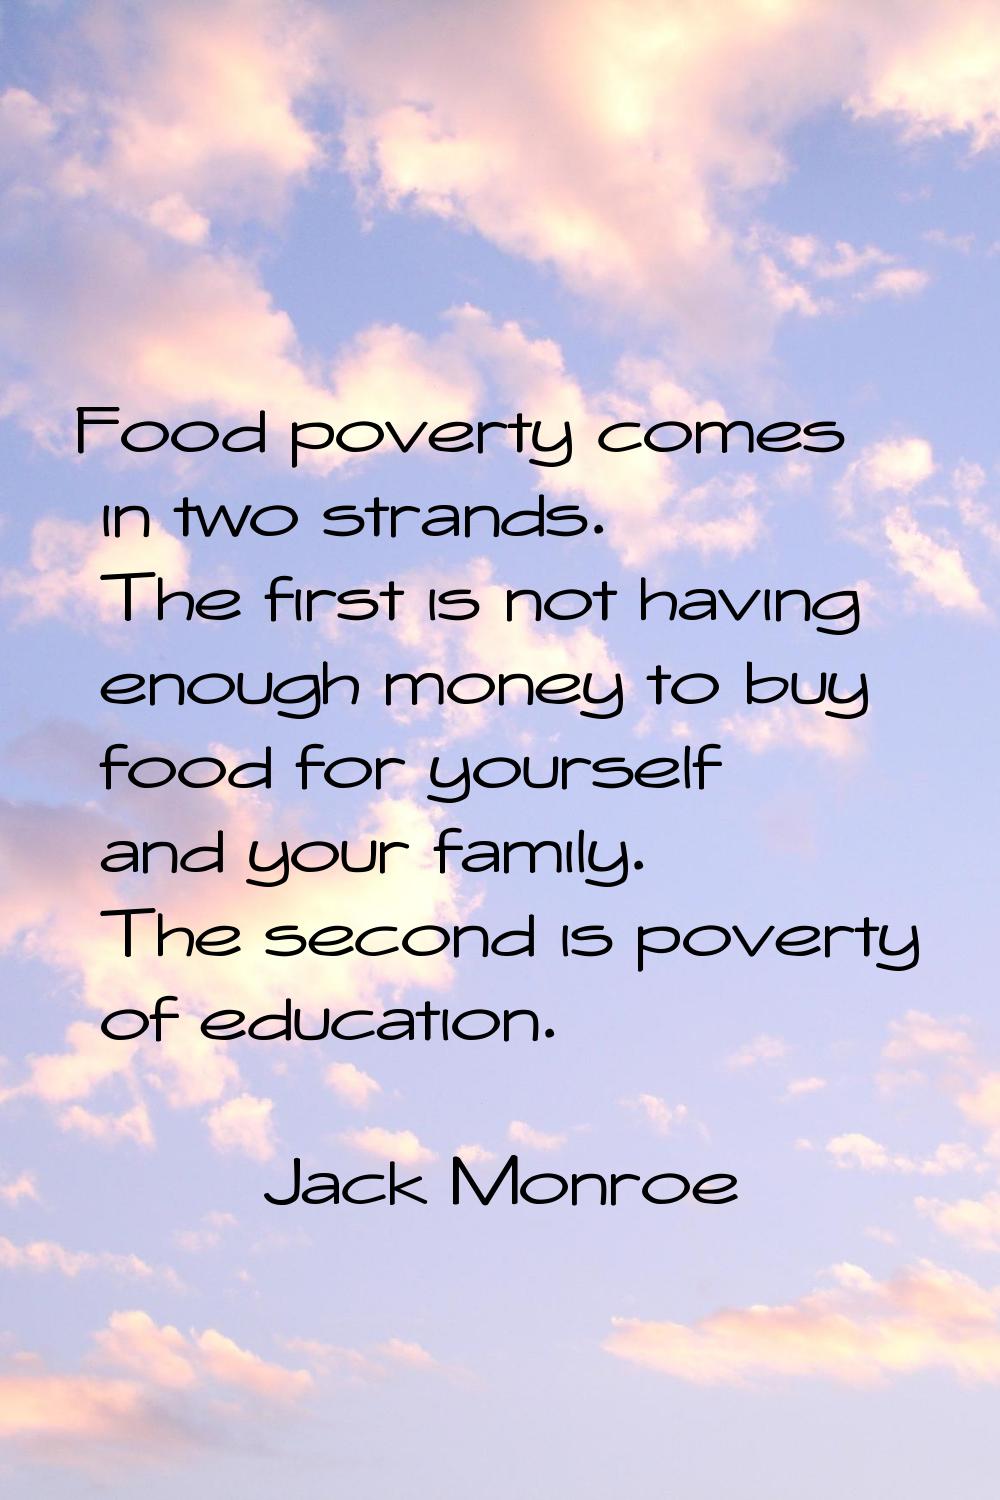 Food poverty comes in two strands. The first is not having enough money to buy food for yourself an